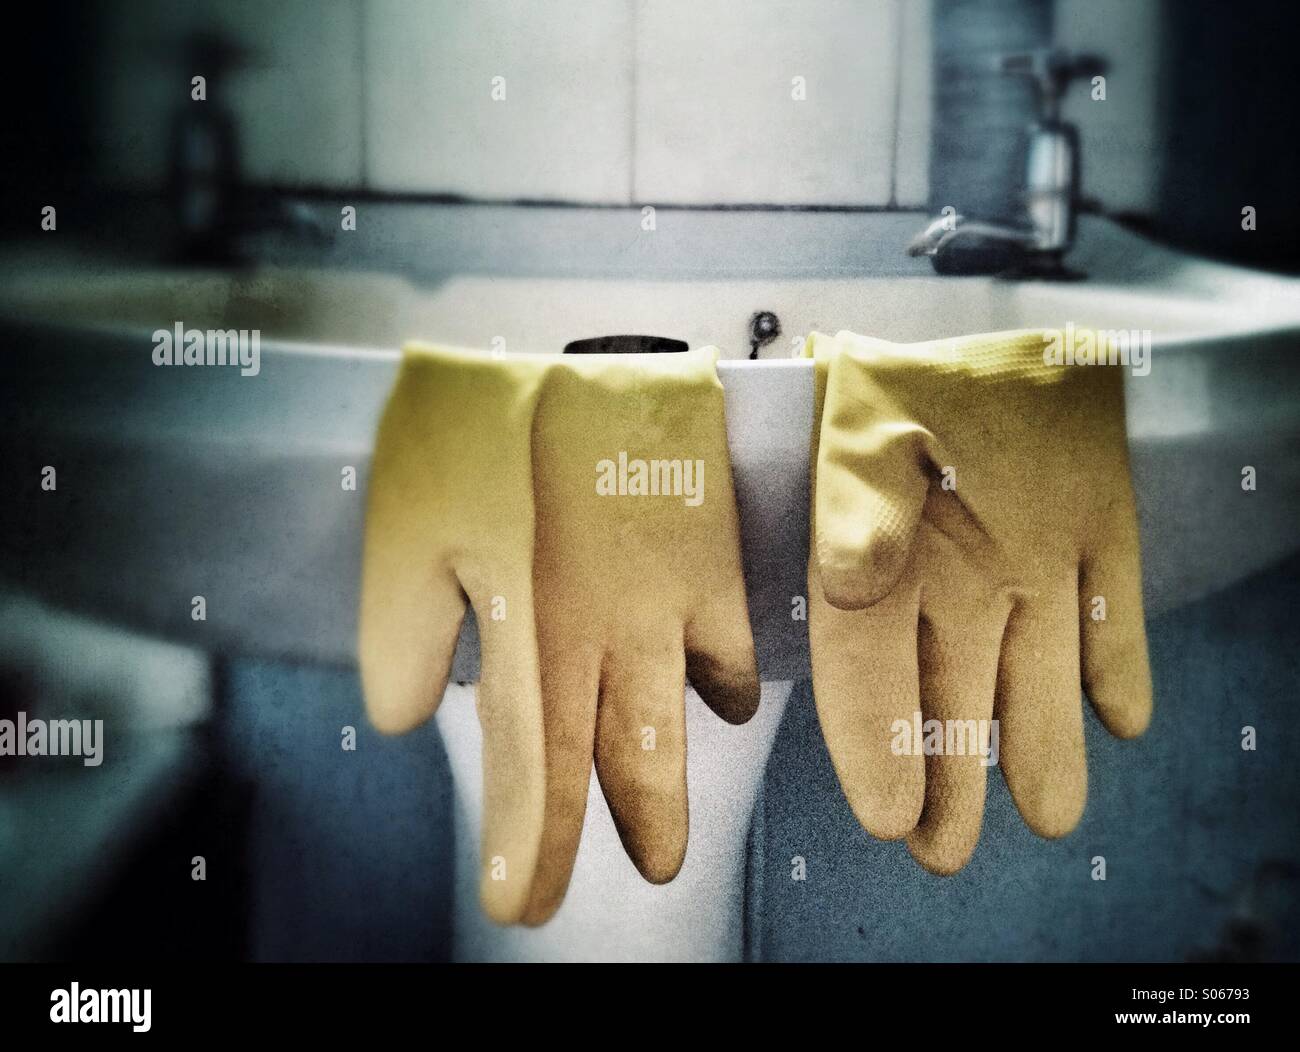 Rubber gloves on a bathroom sink Stock Photo